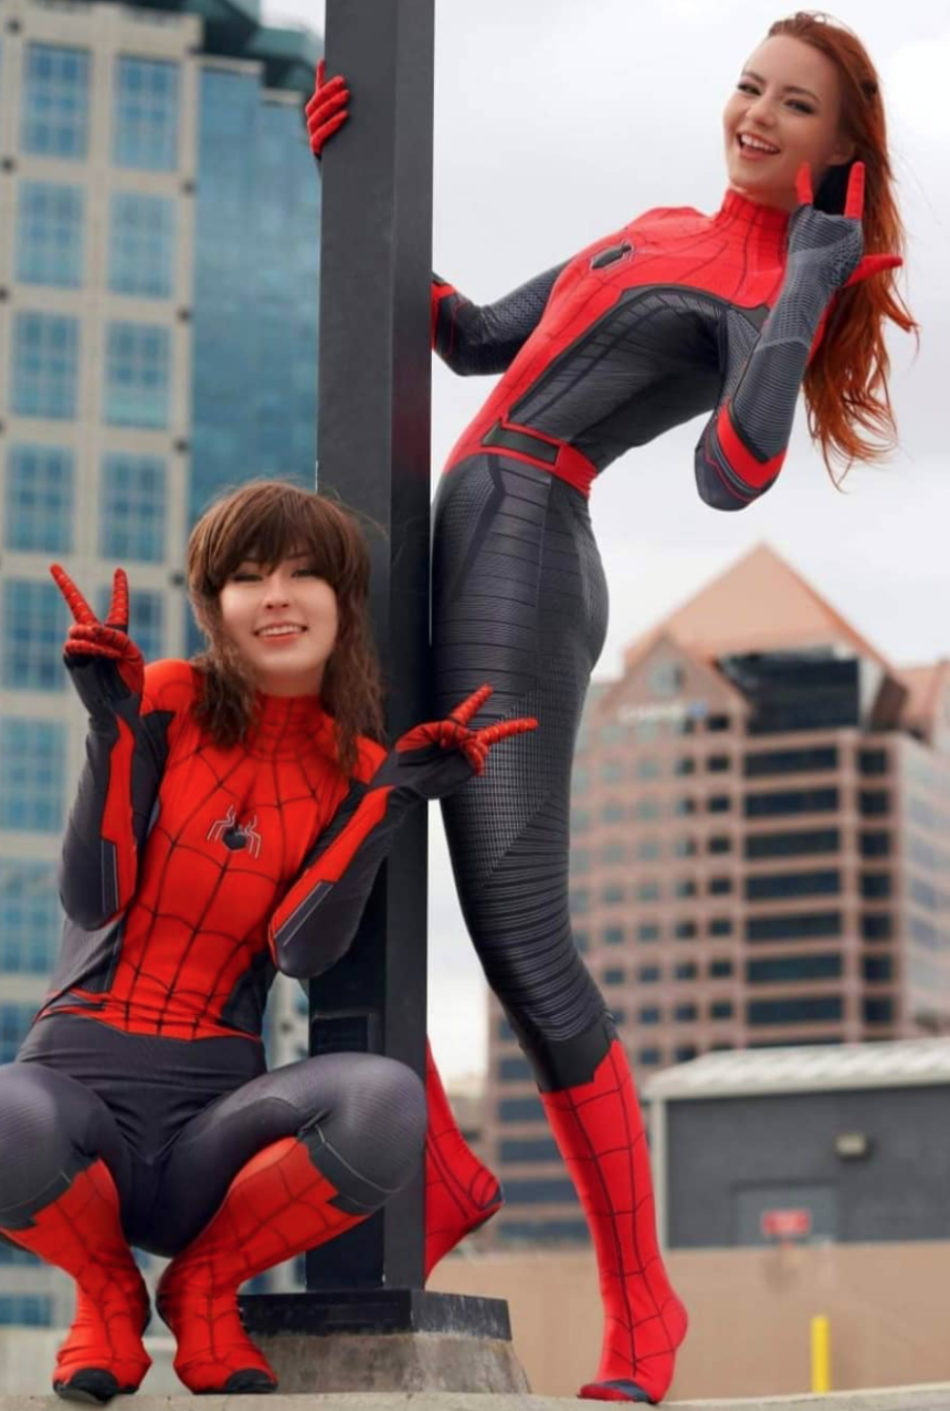 Sexy Red Hot Cosplay Girls Spiderman Women Best Photo Compilation 2021 (89 HQ Photos) 133